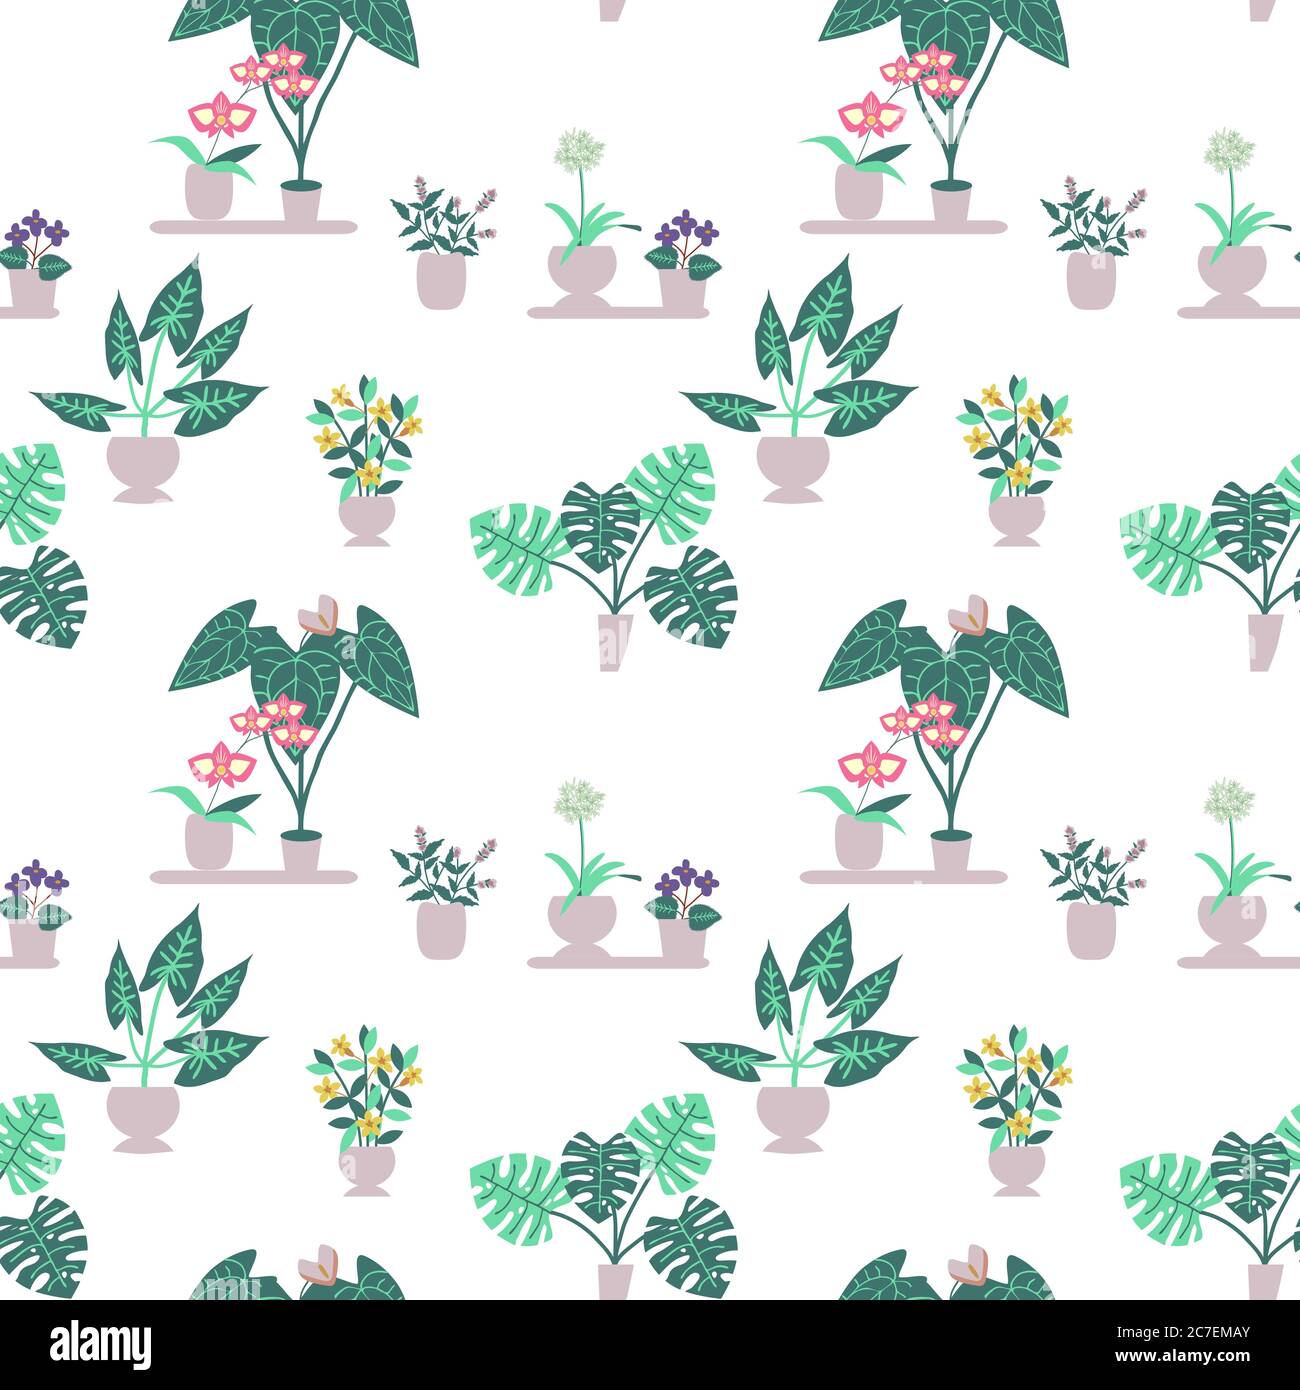 Seamless house plants vector pattern Stock Vector